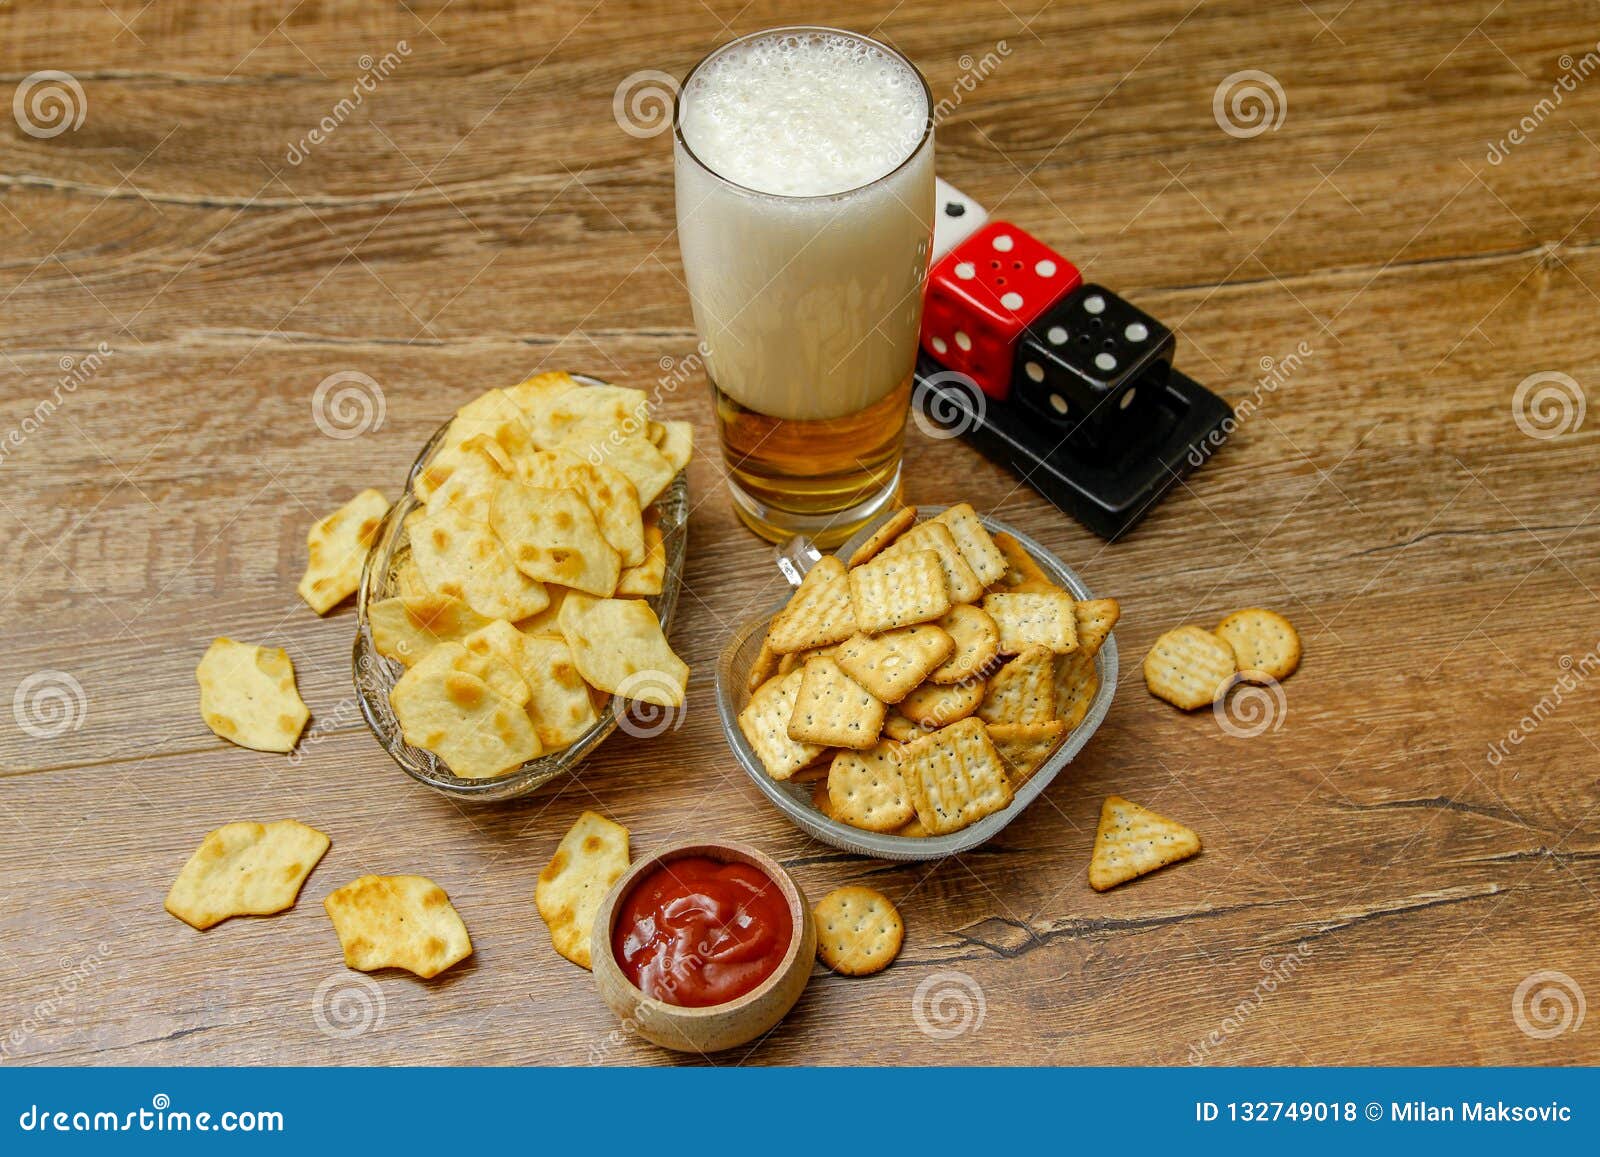 Crackers with Beer and Dice Stock Photo - Image of cooking, indoors: 132749018